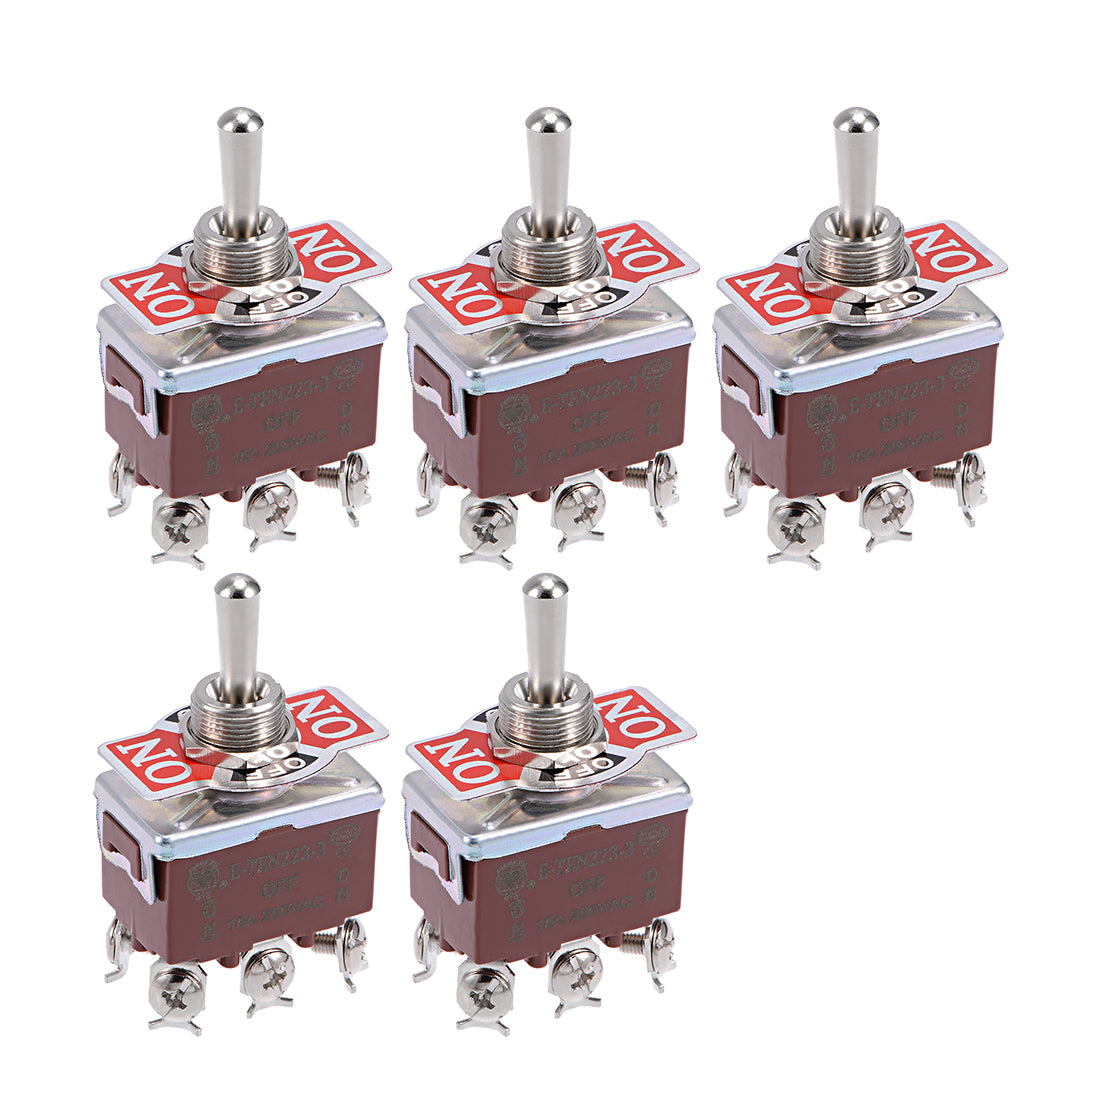 uxcell Uxcell DPDT Rocker Toggle Switch Heavy-Duty 15A 250V 6P (Momentary ON)/OFF/(Latching ON) Metal Bat 5pcs